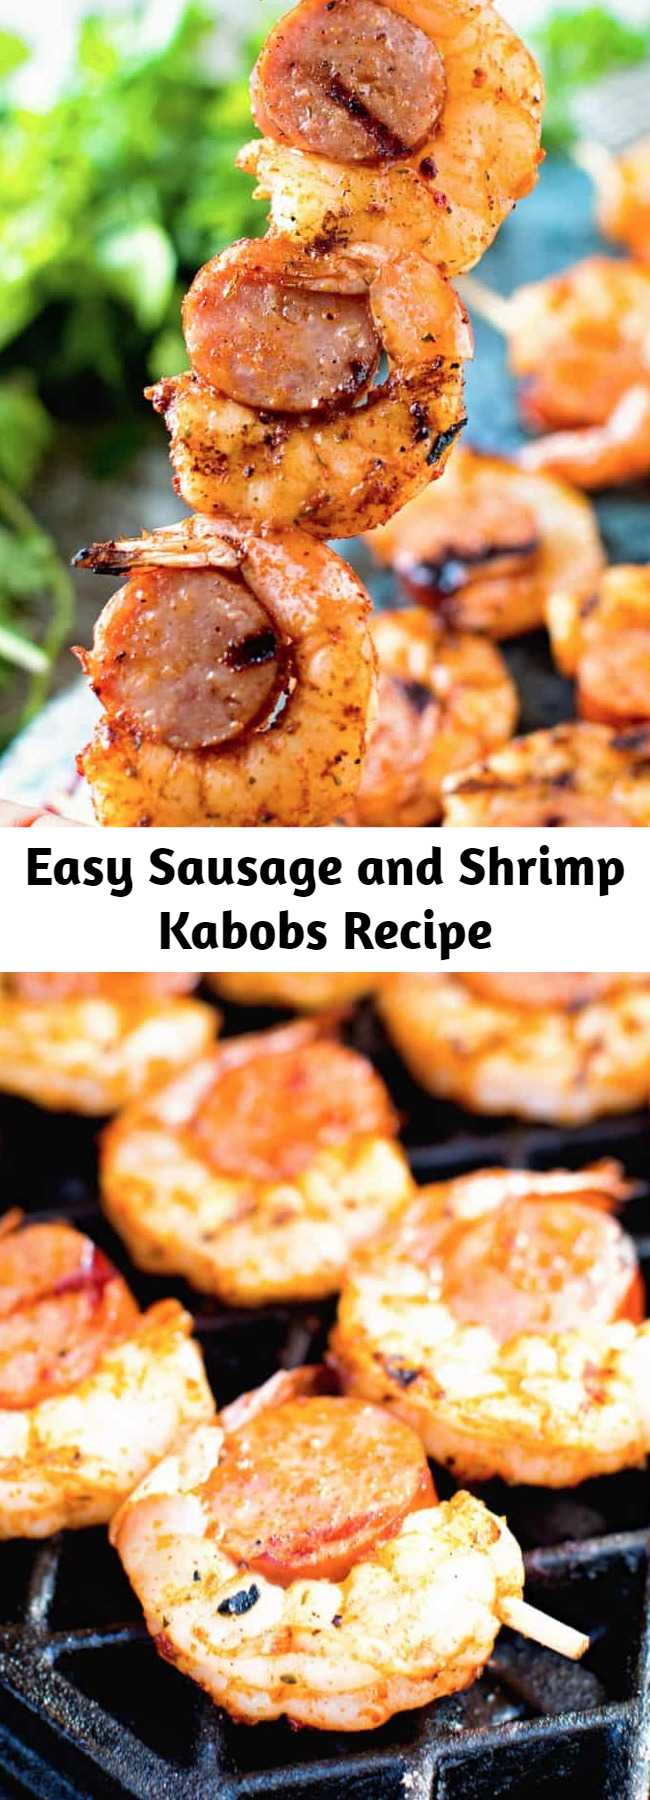 Easy Sausage and Shrimp Kabobs Recipe - These Sausage and Shrimp Kabobs are packed with flavor and super easy! They are the perfect way to make dinner on the grill when you are busy yet these skewers are fancy enough to serve at your next BBQ! #shrimp #skewers